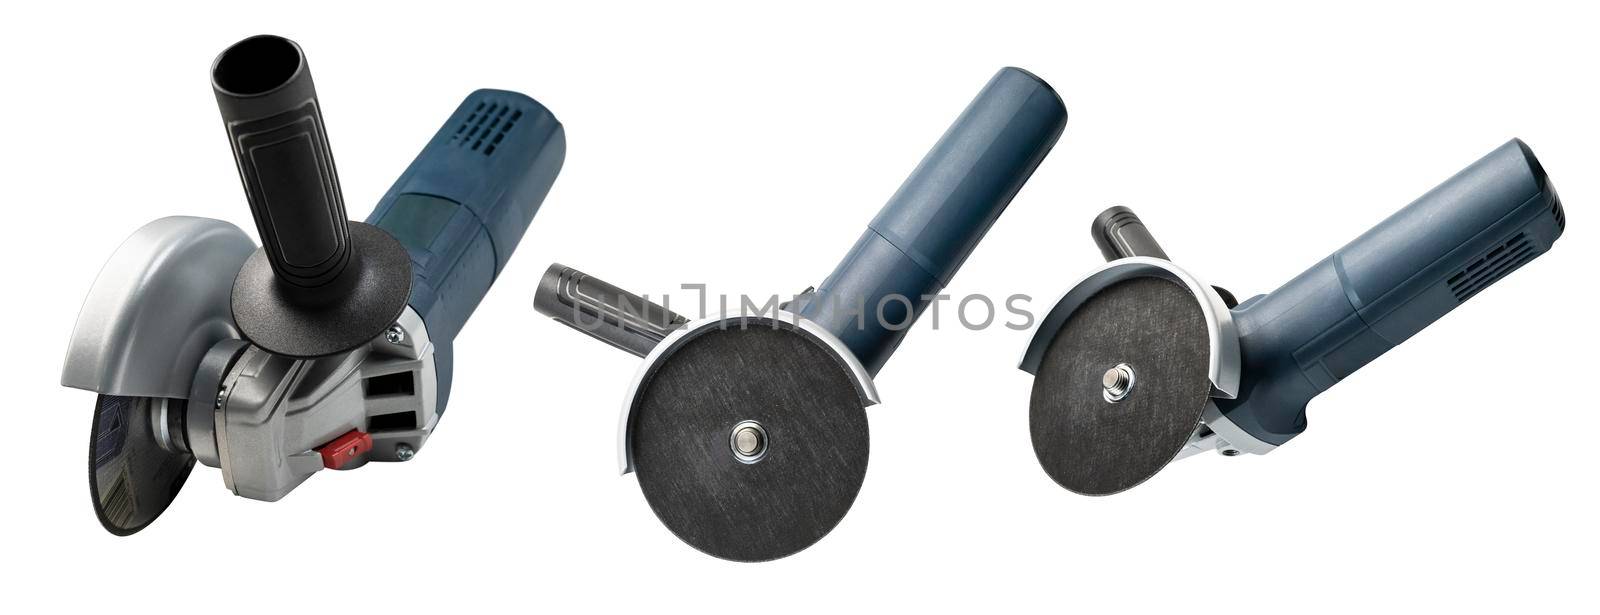 electric grinding machine in different angles on a white background.